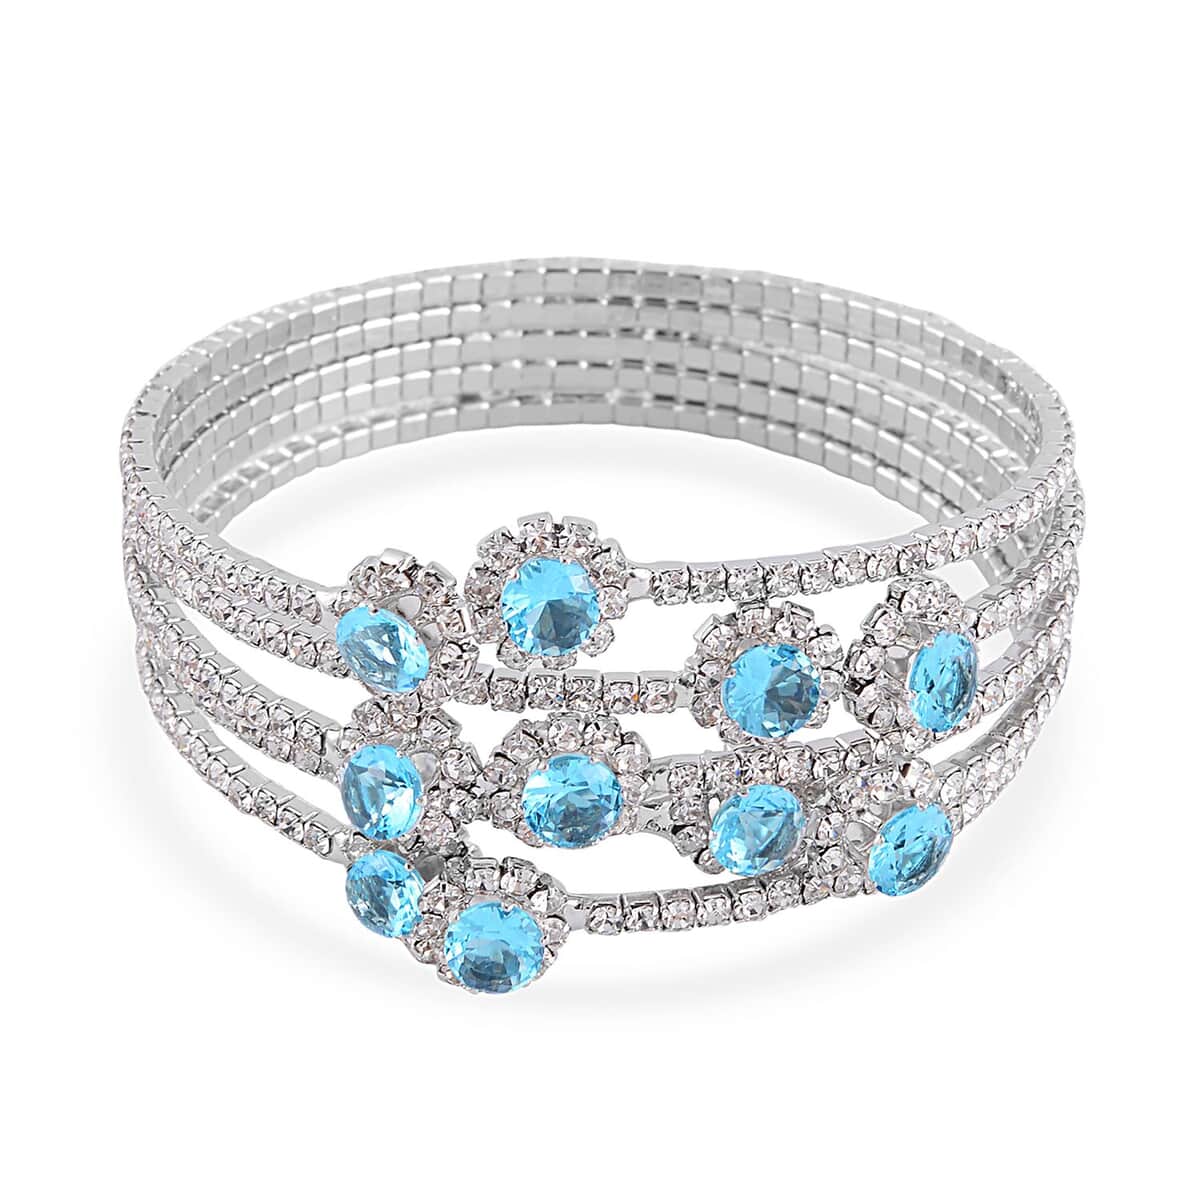 Sky Blue and White Color Austrian Crystal Bangle Bracelet (7-7.5 In) and Earrings in Silvertone image number 2